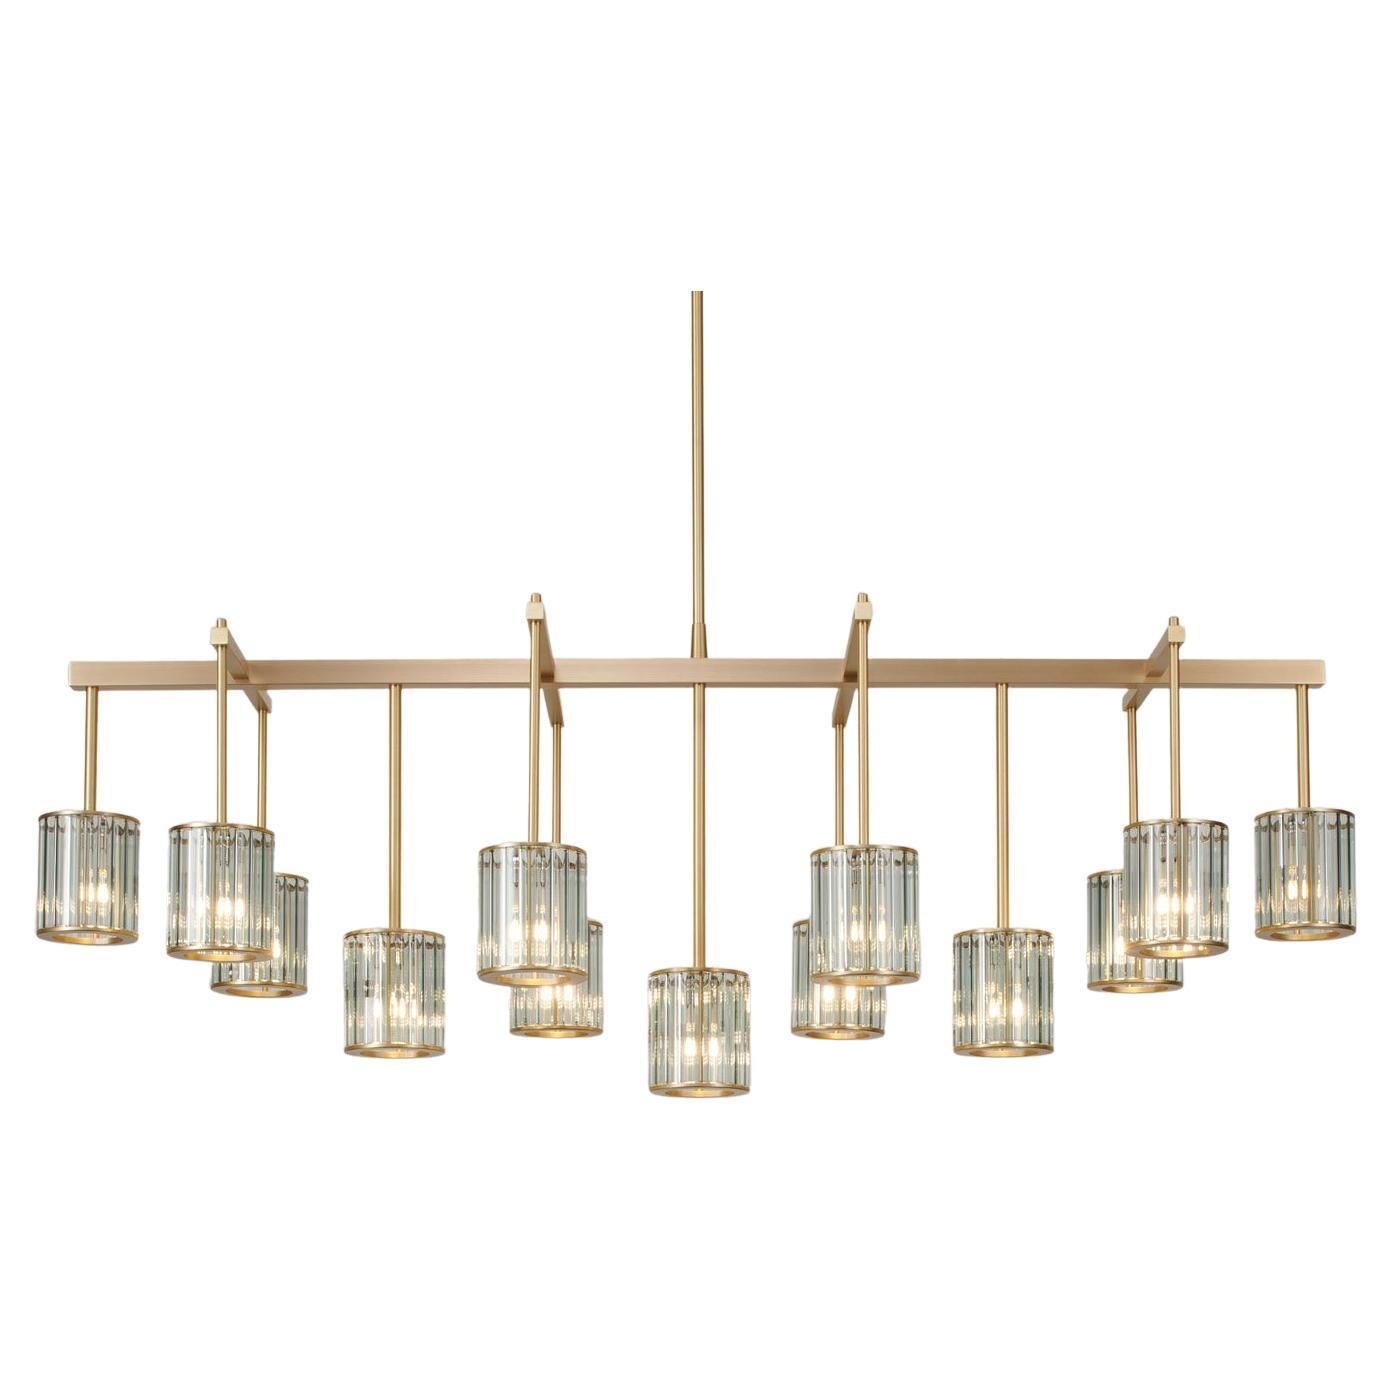 Flute Beam Chandelier with 13 Arms in Brushed Brass and Smoke Glass Diffusers